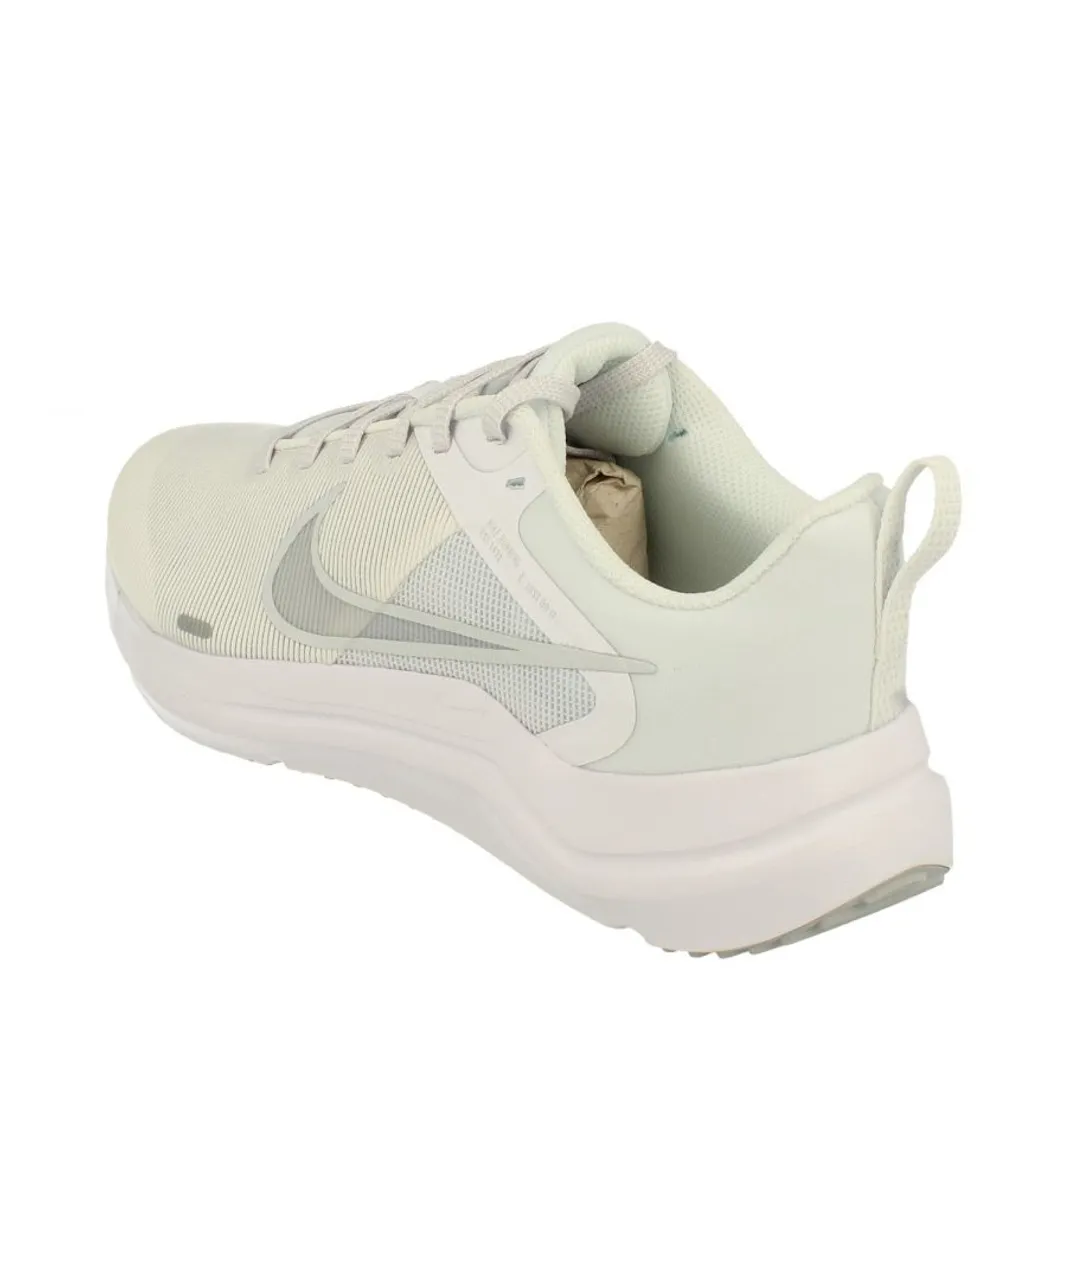 Nike Downshifter 12 Mens White Trainers